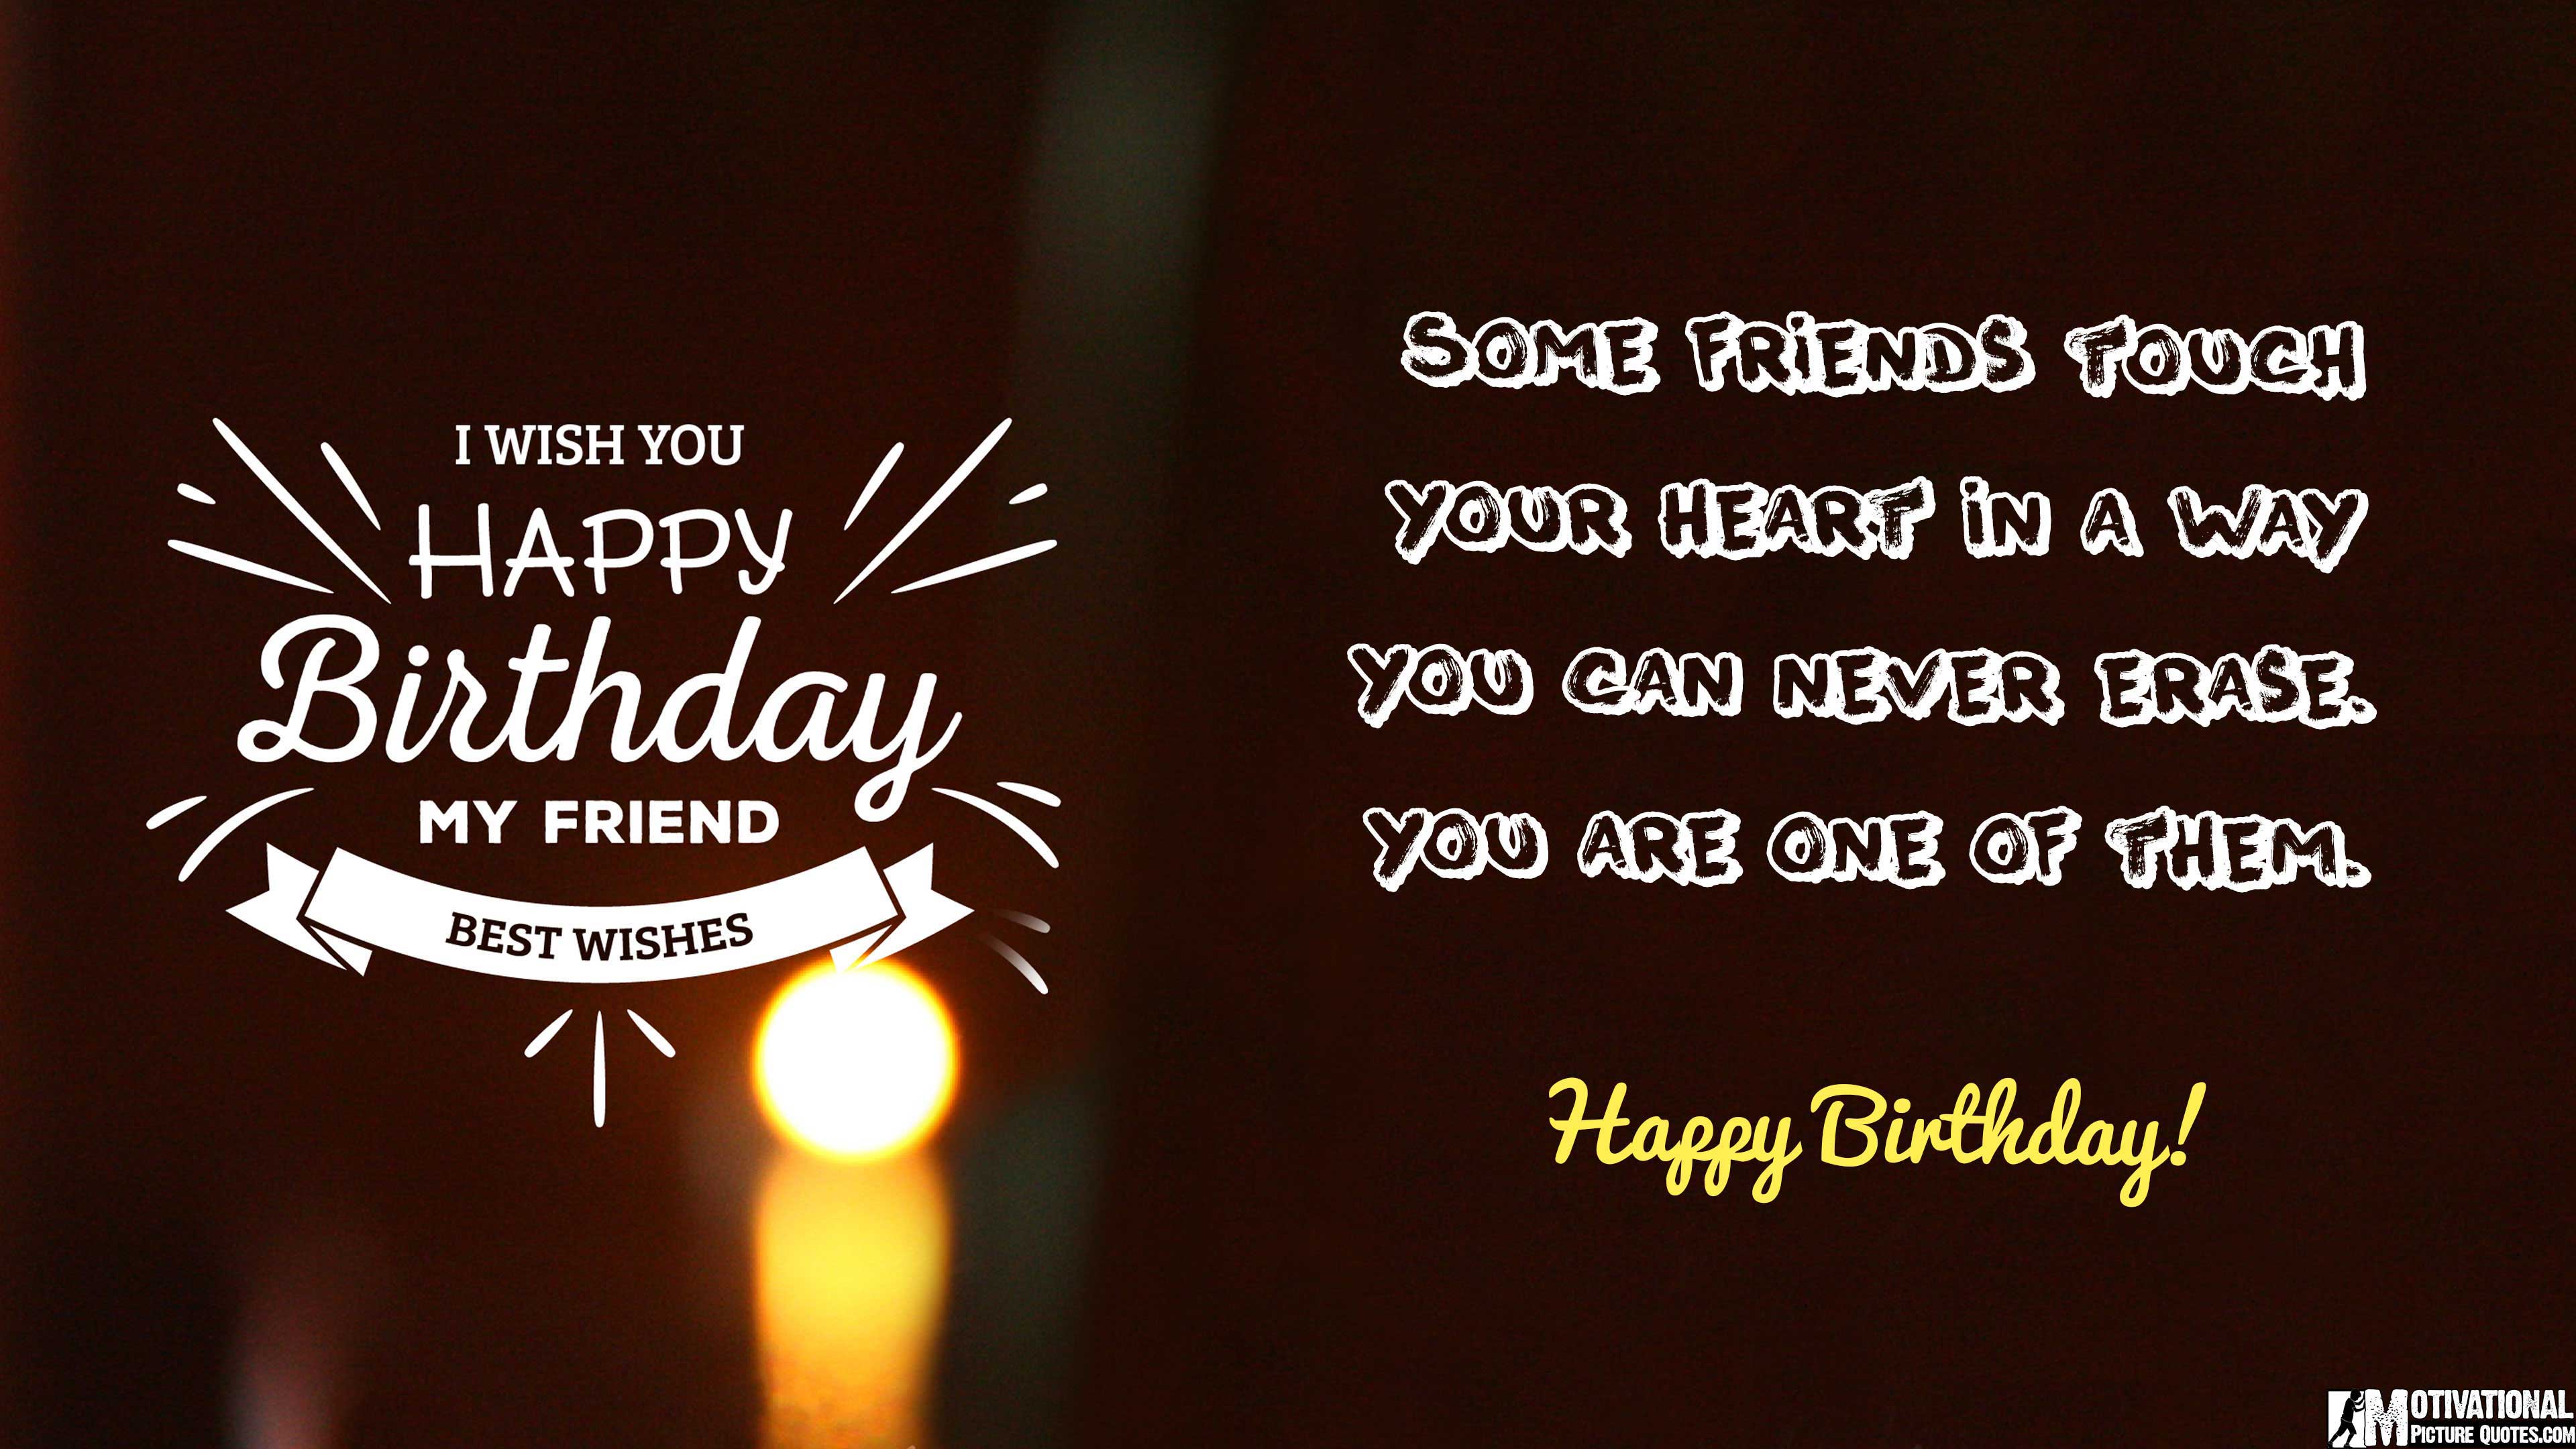 35+ Inspirational Birthday Quotes Images | Insbright